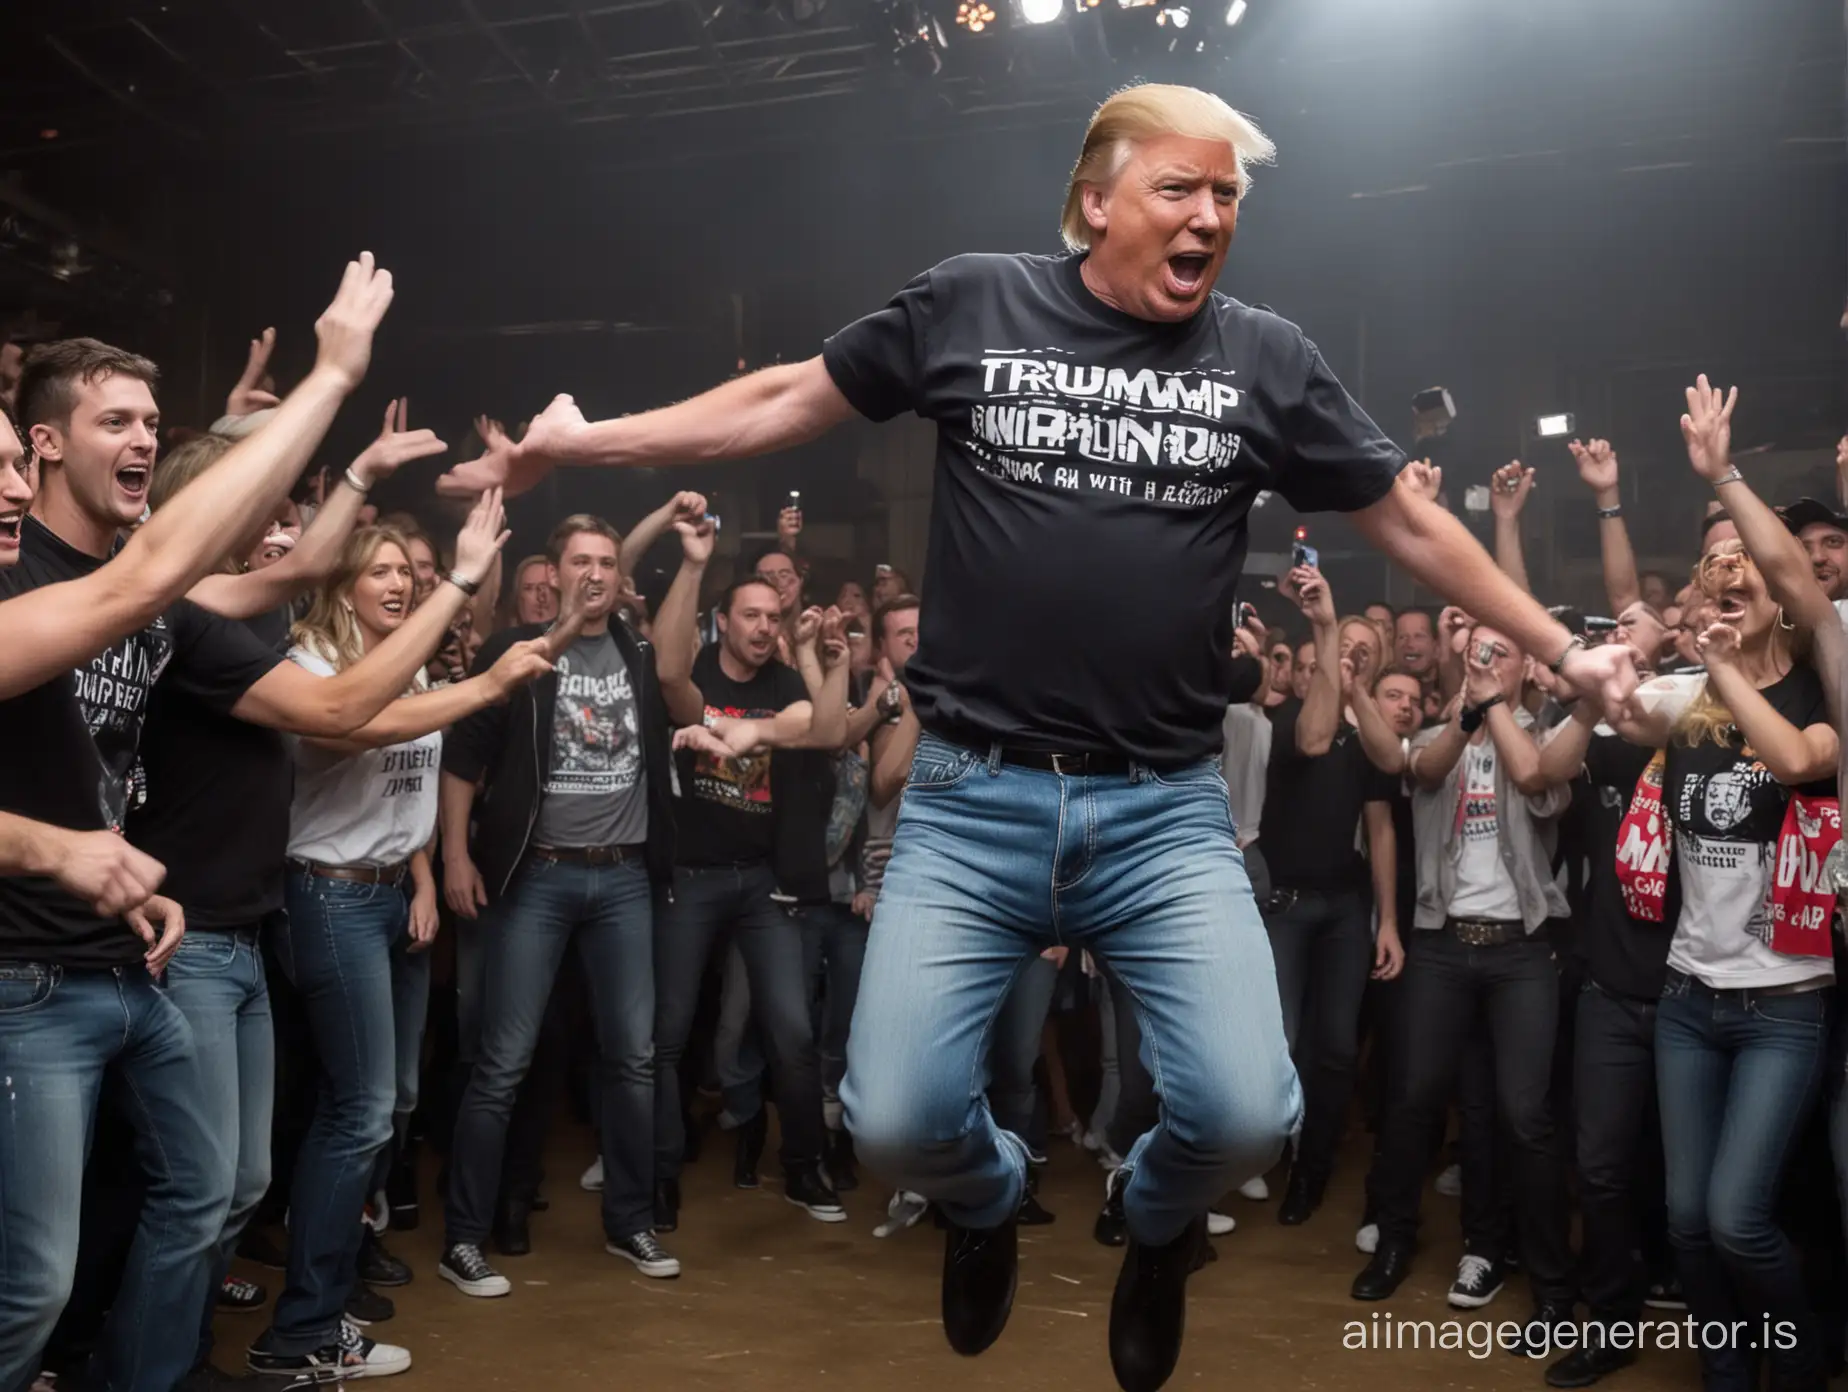 Donald Trump is at a techno rave. Jumping in the air. He is wearing a T-shirt and jeans. He Dancing with the People